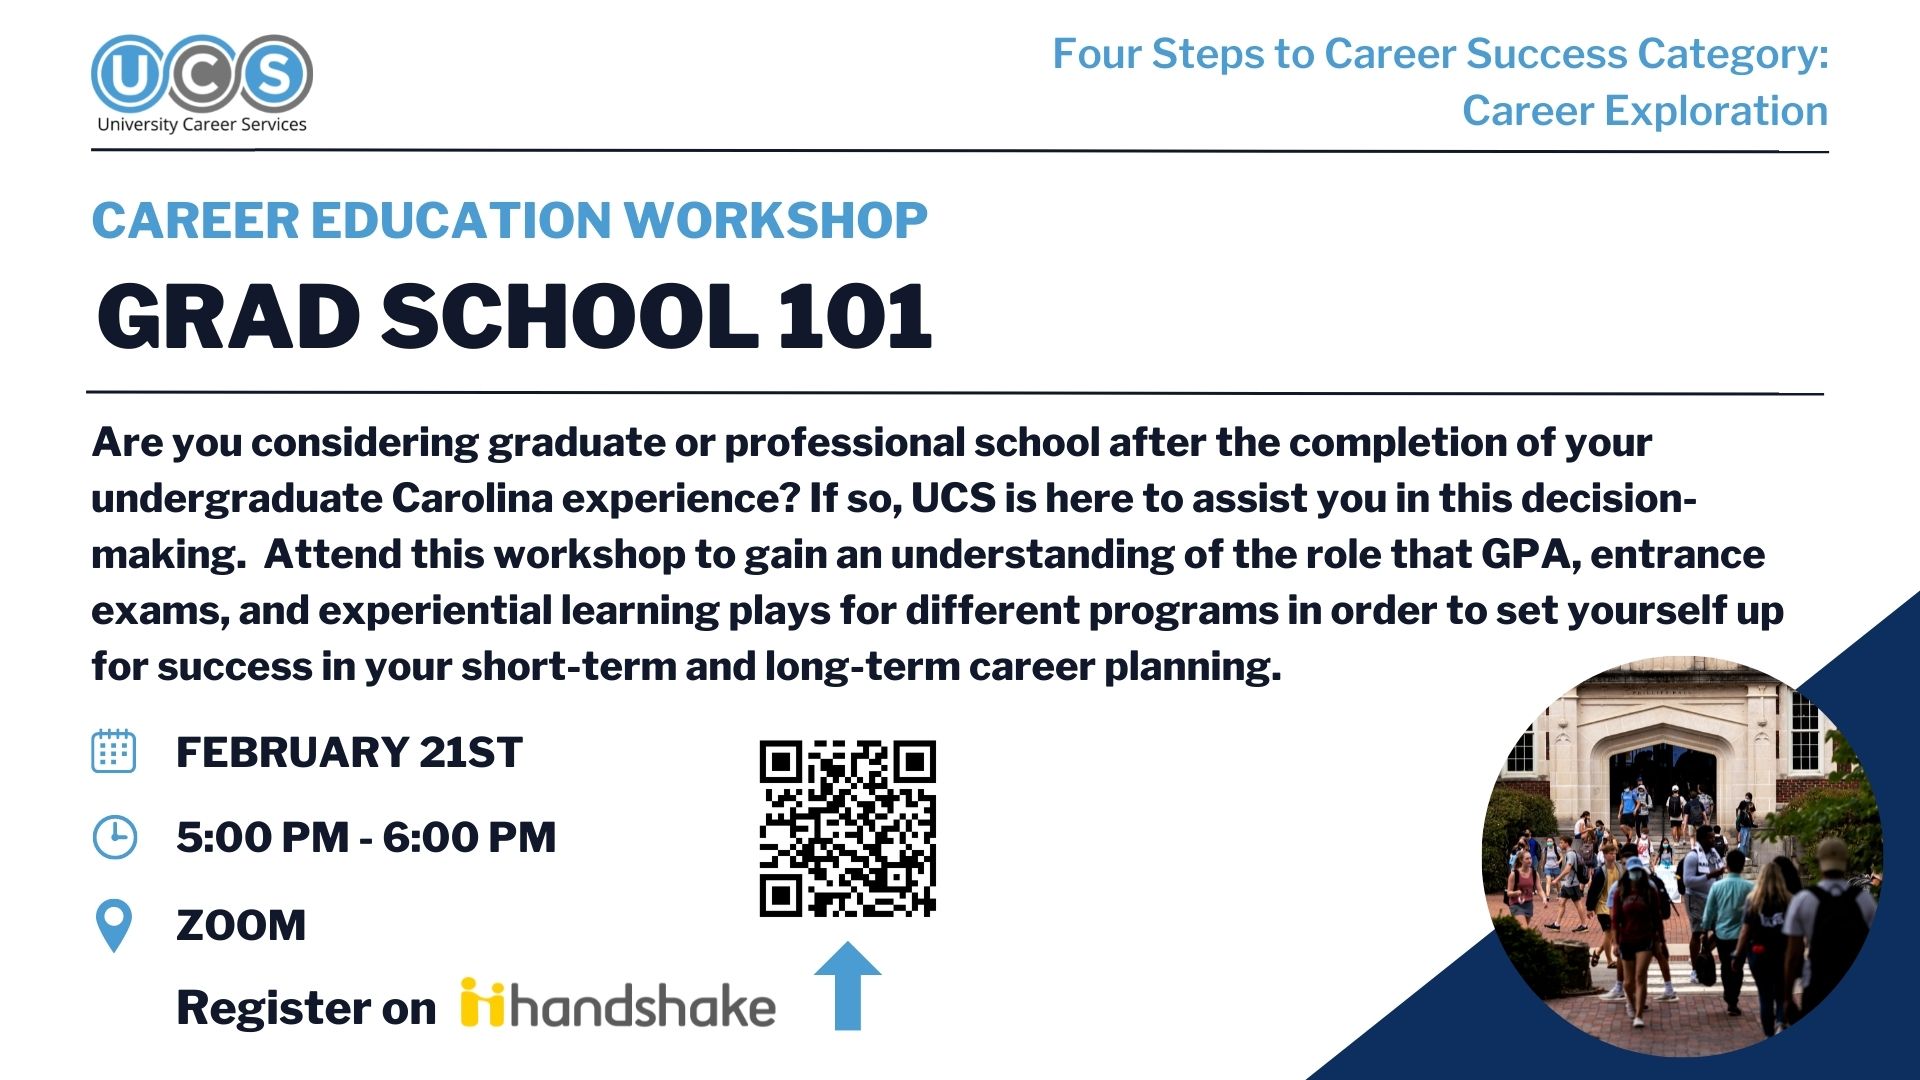 Are you considering graduate or professional school after the completion of your undergraduate Carolina experience? If so, UCS is here to assist you in this decision-making.  Attend this workshop to gain an understanding of the role that GPA, entrance exa